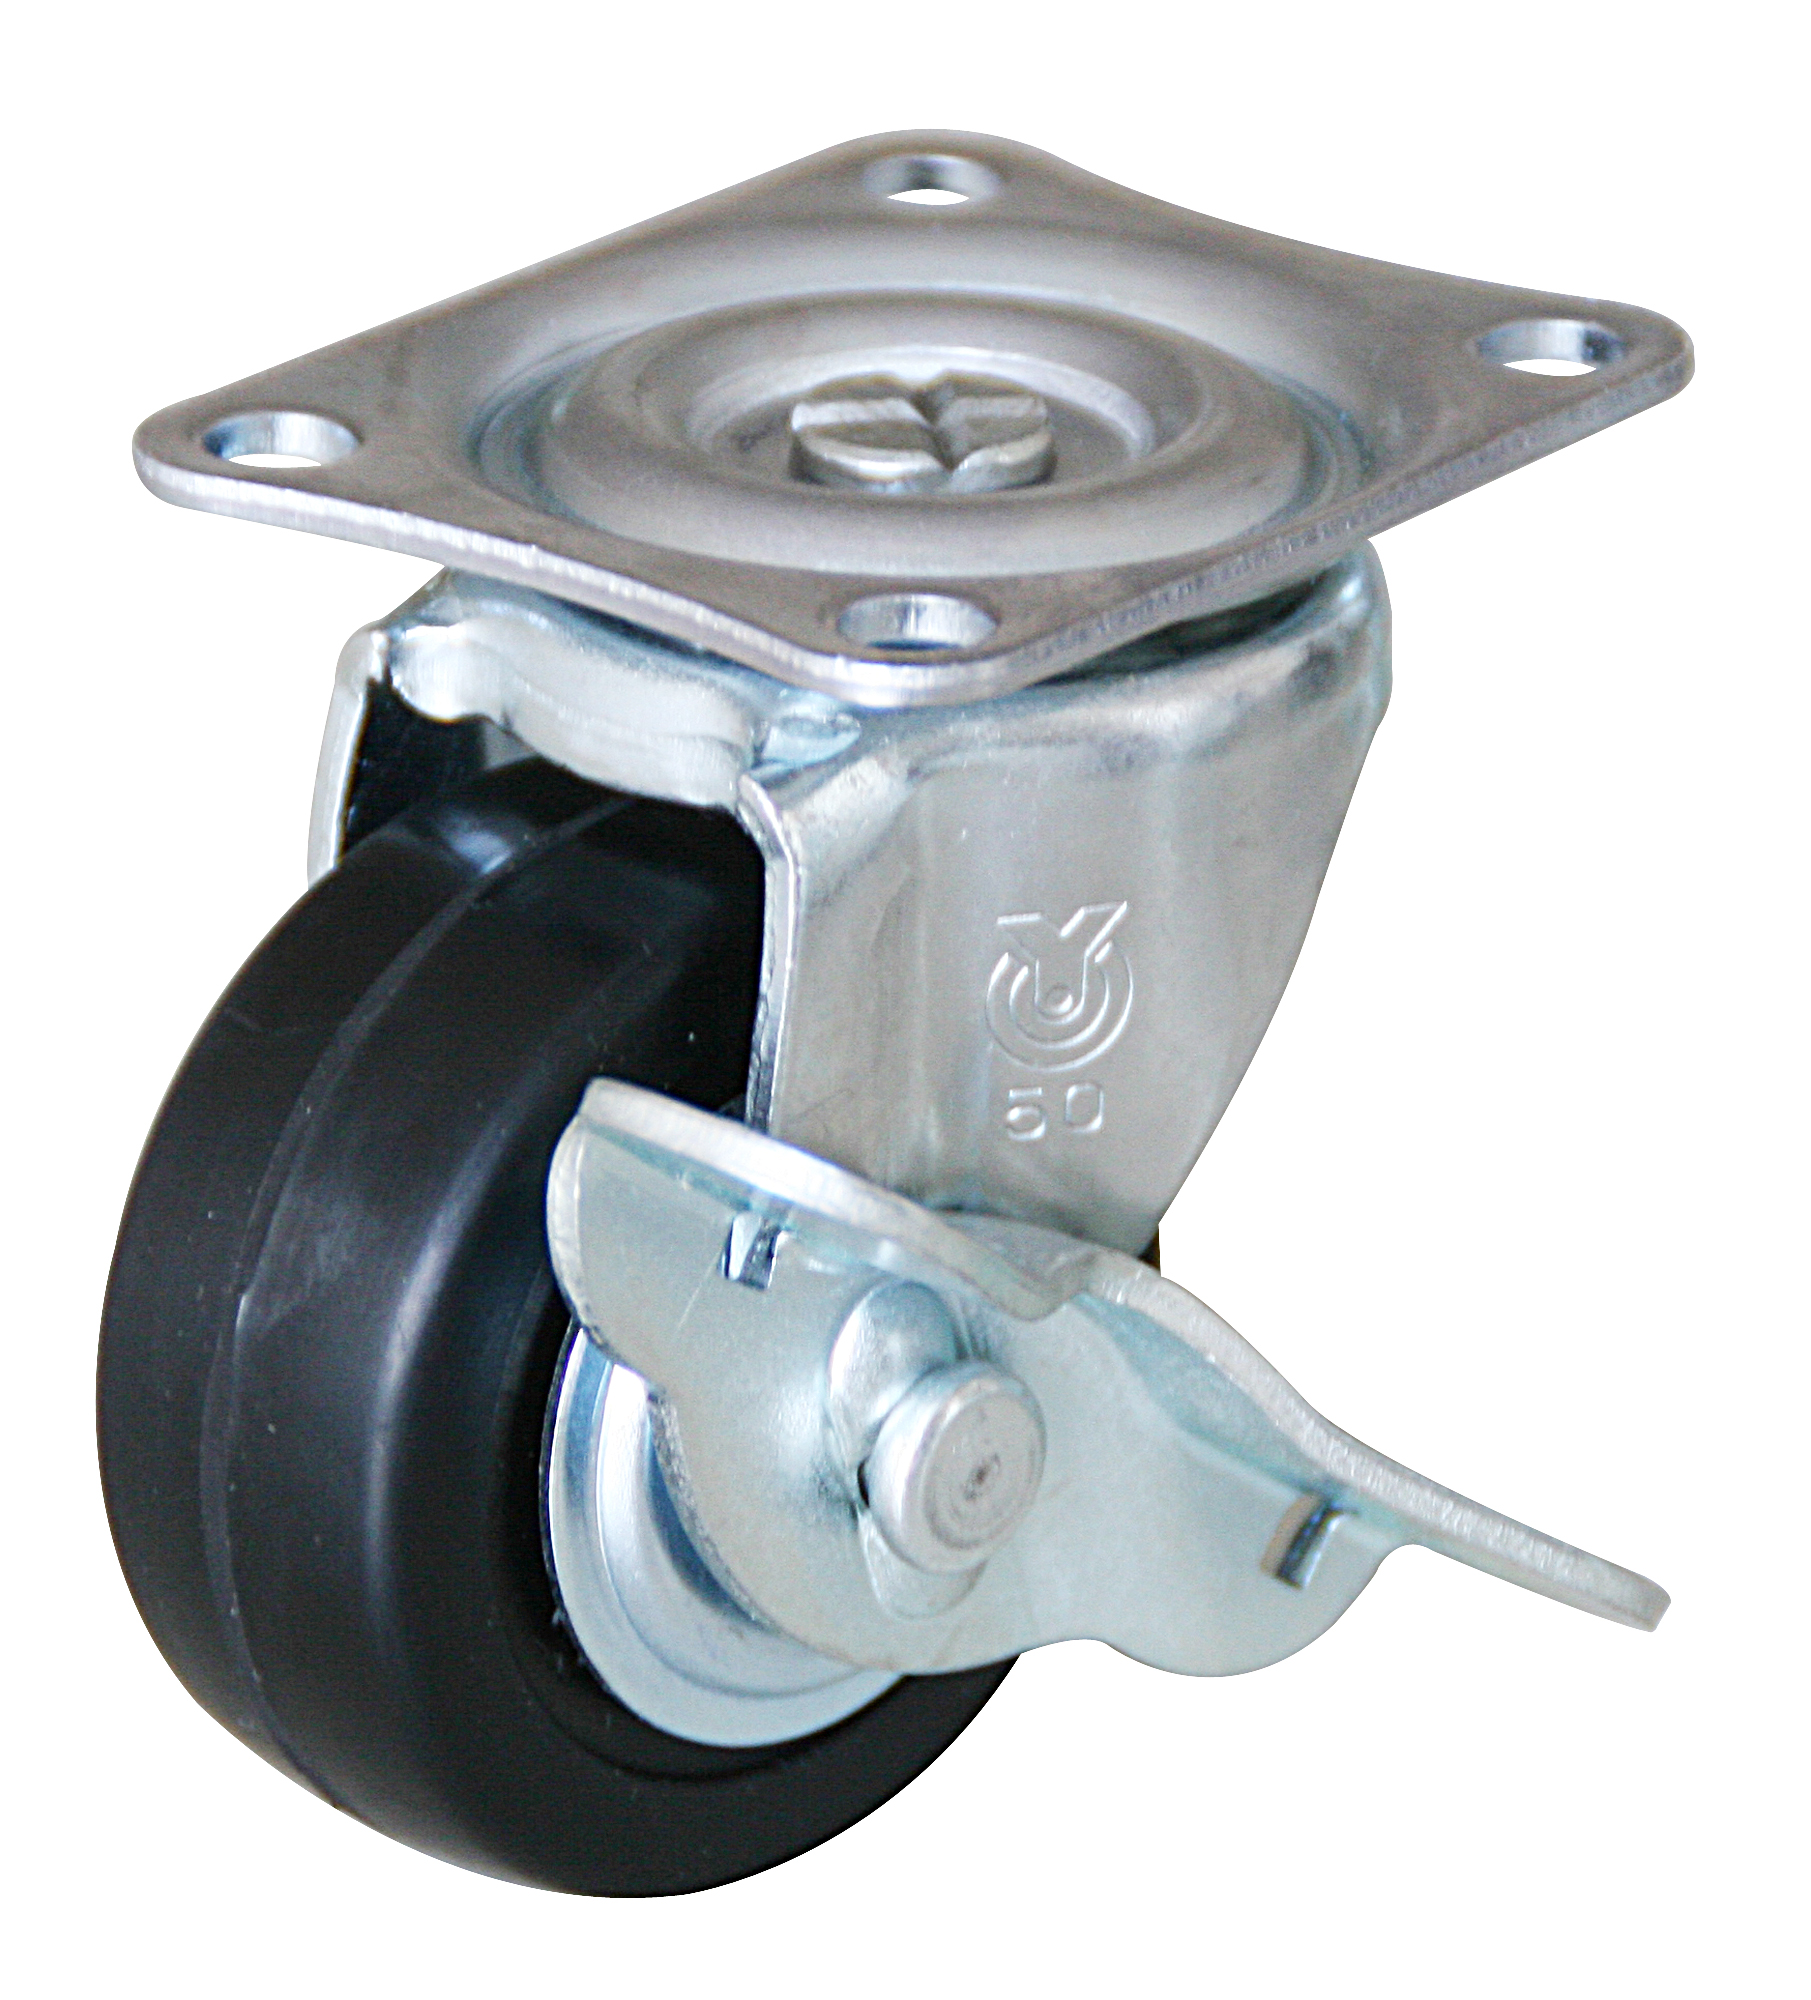 Casters - With swivel plate, G-S series. G-50NS